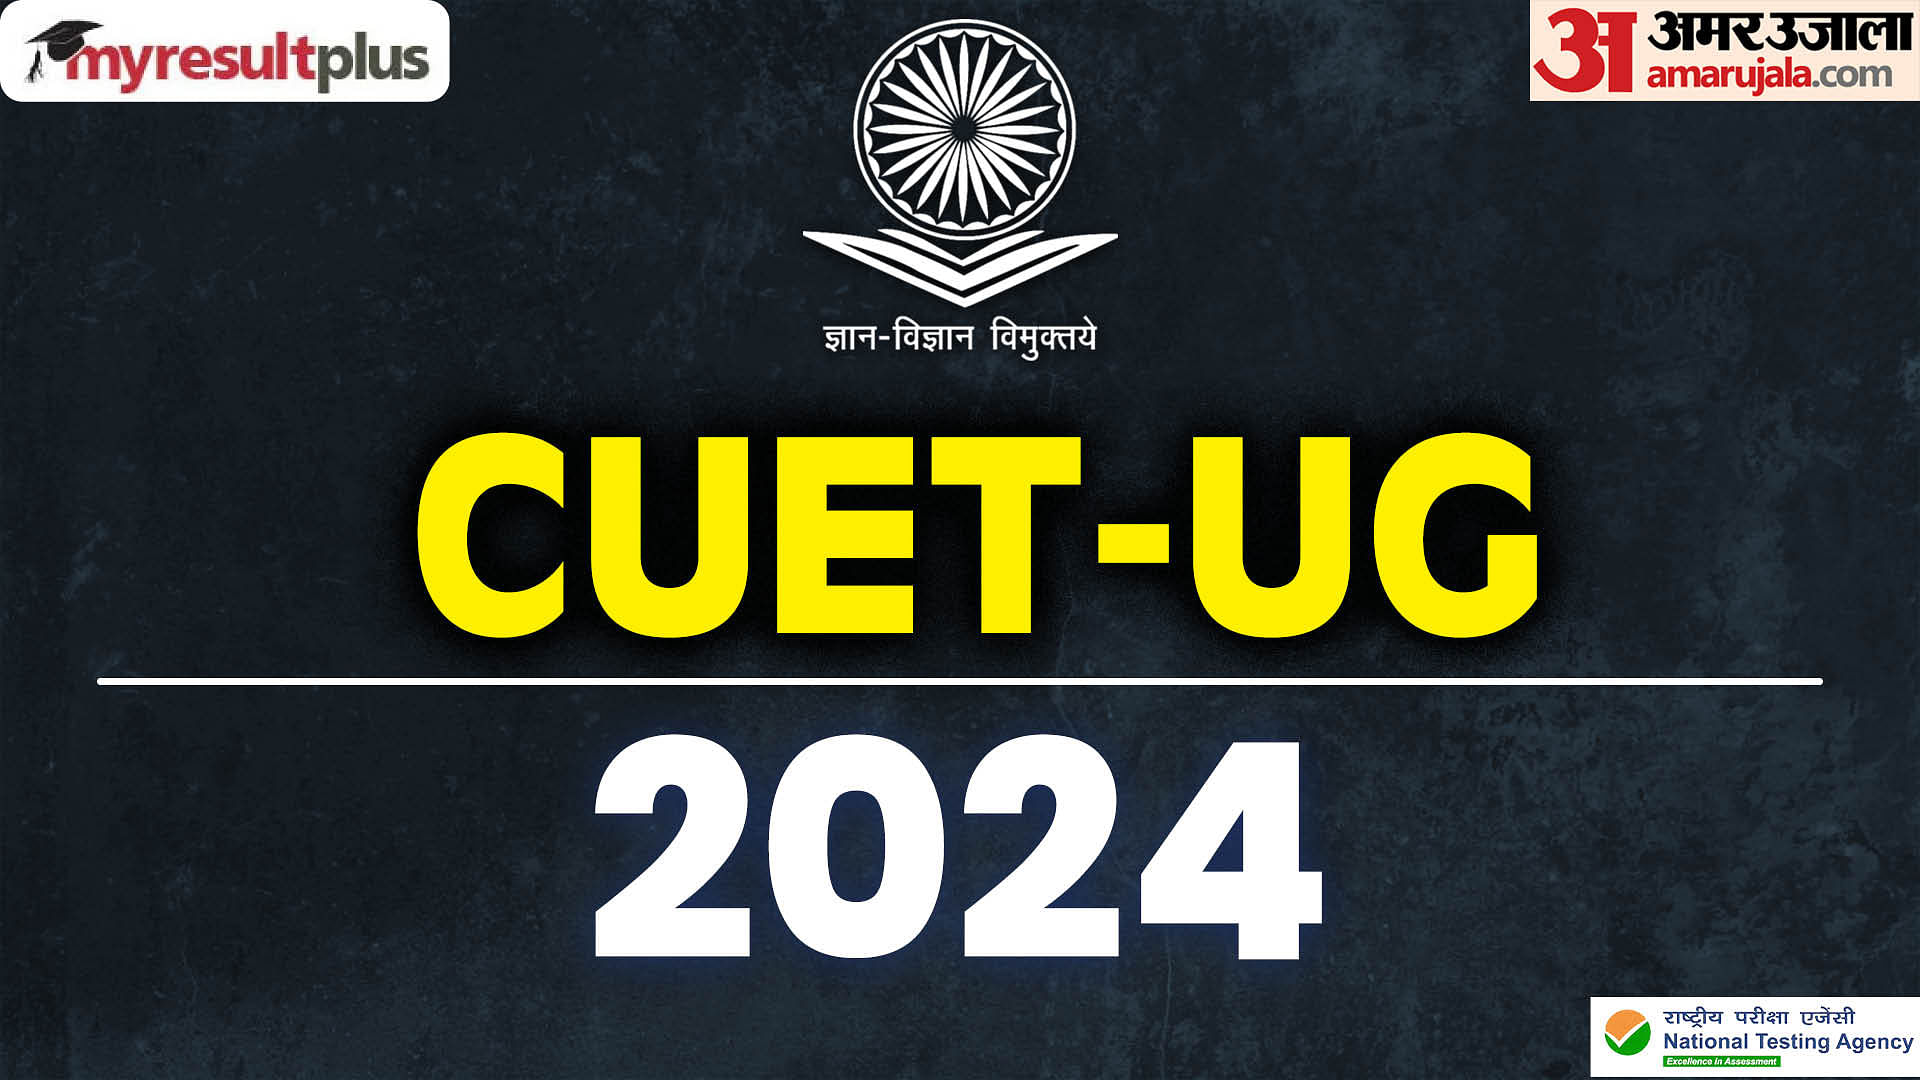 CUET UG admit card 2024 for Delhi candidates expected today, Read more details here